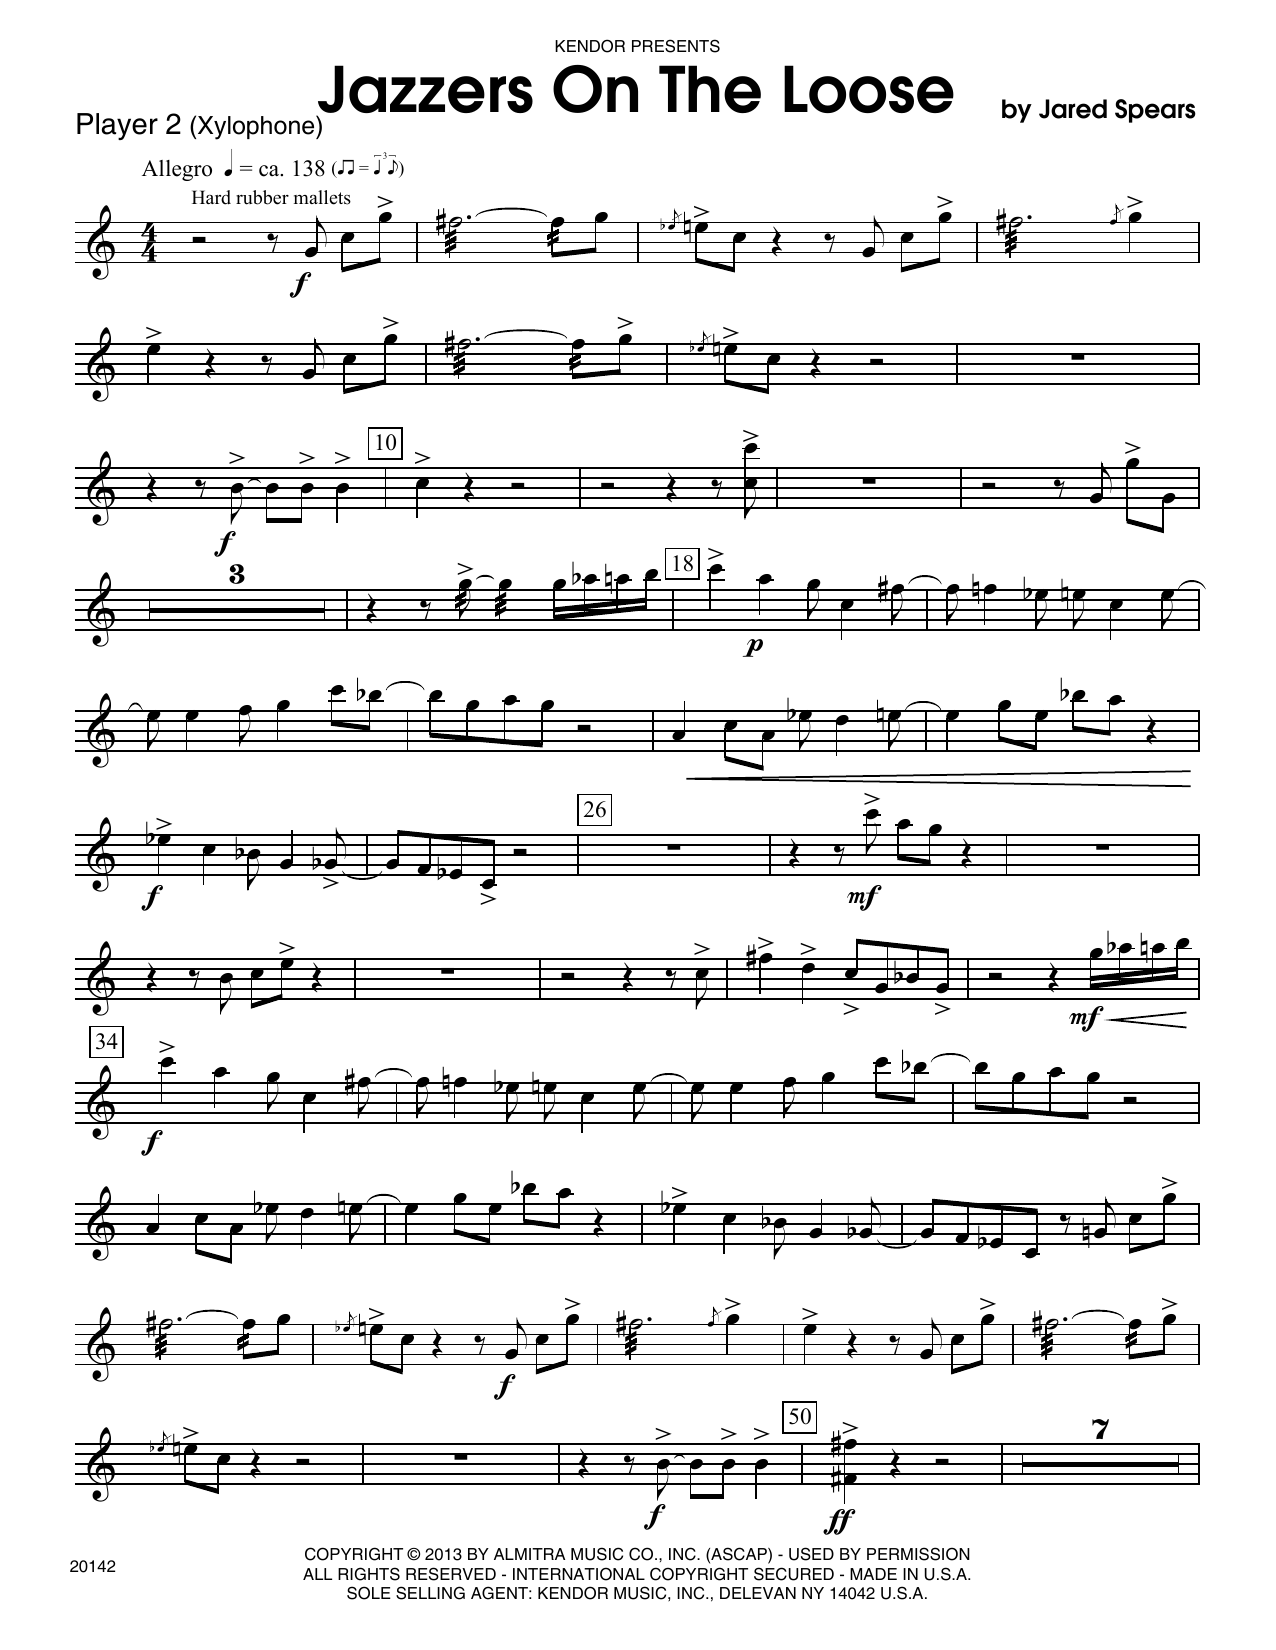 Download Jared Spears Jazzers On The Loose - Xylophone Sheet Music